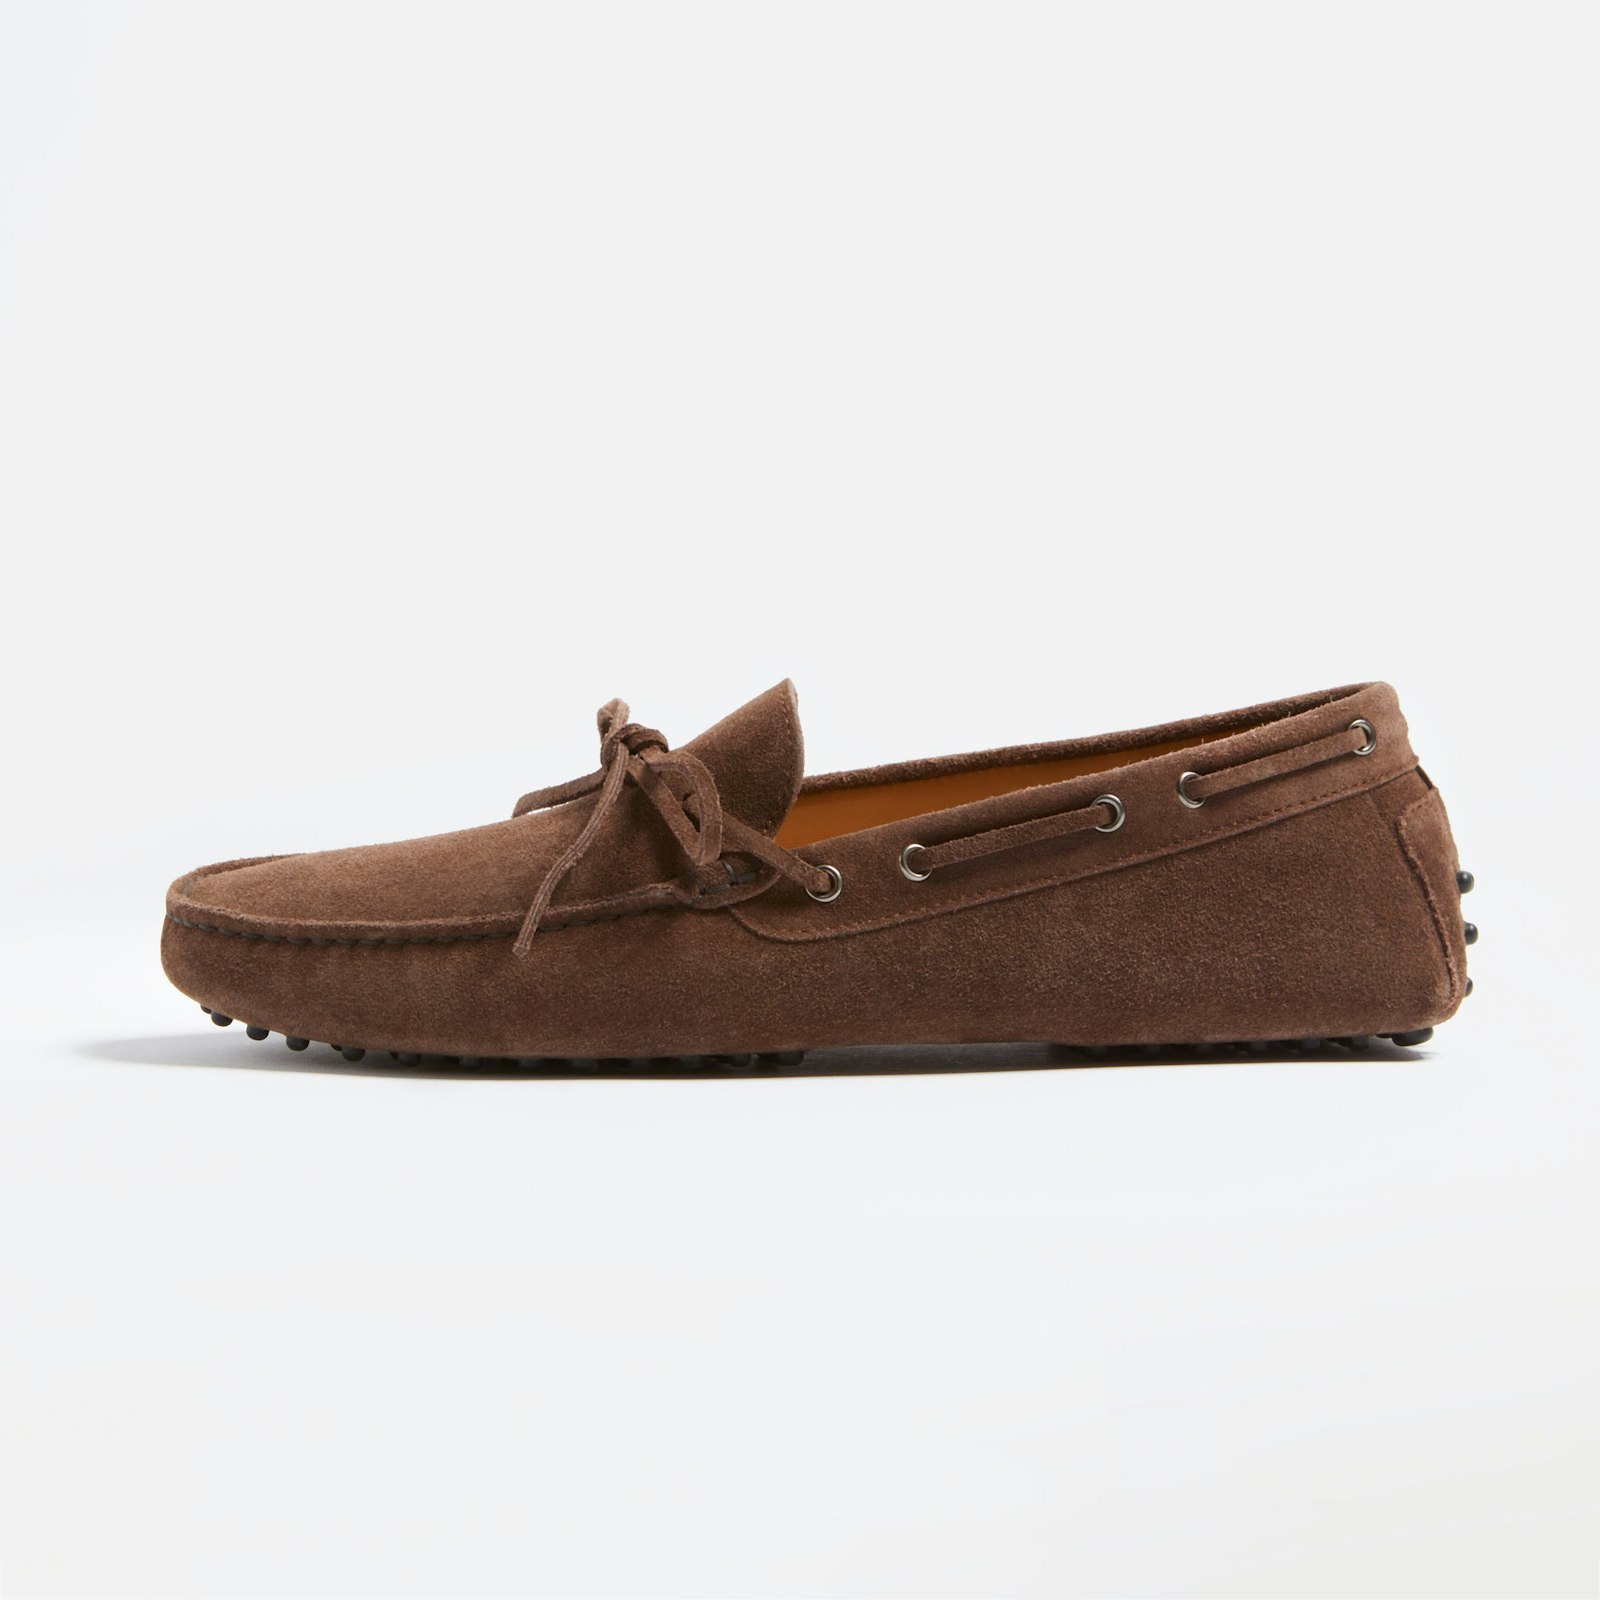 Lucca_LaceUp_DrivingShoe_Chocolate_1x1_LEFT_0332.jpg